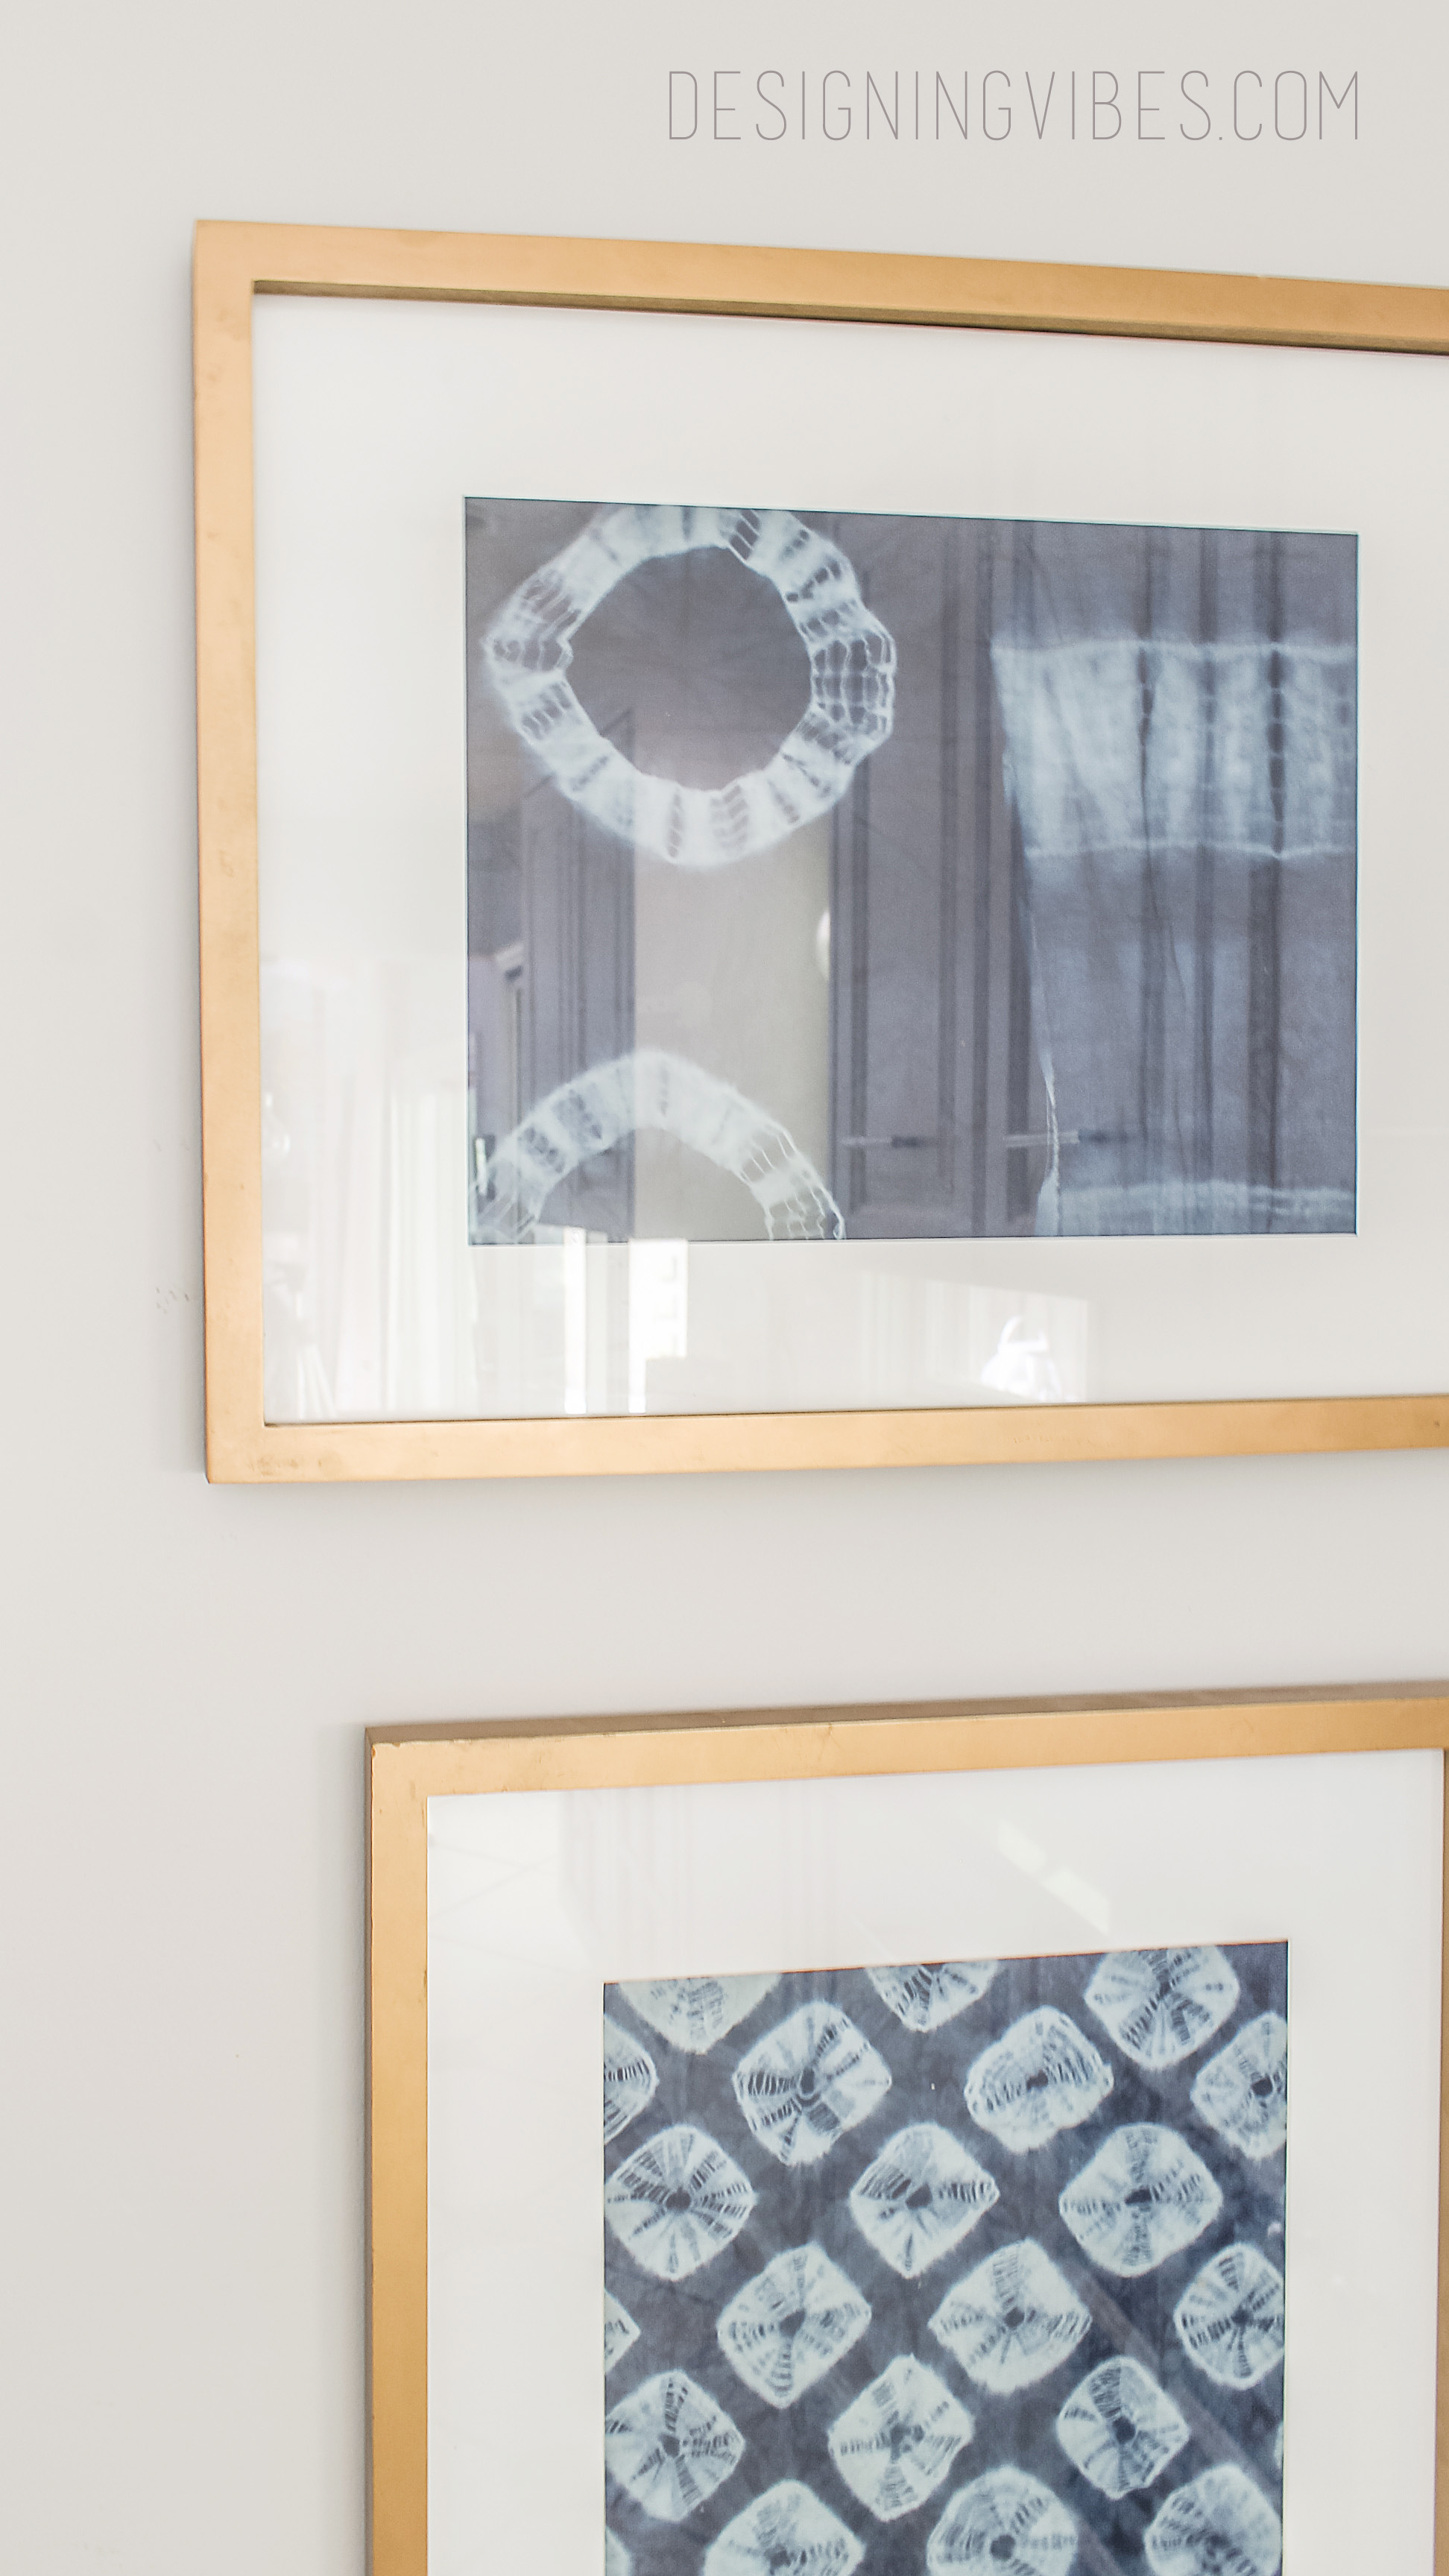 DIY Shibori Wall Art in Under 5 Minutes – Lesson on Authenticity